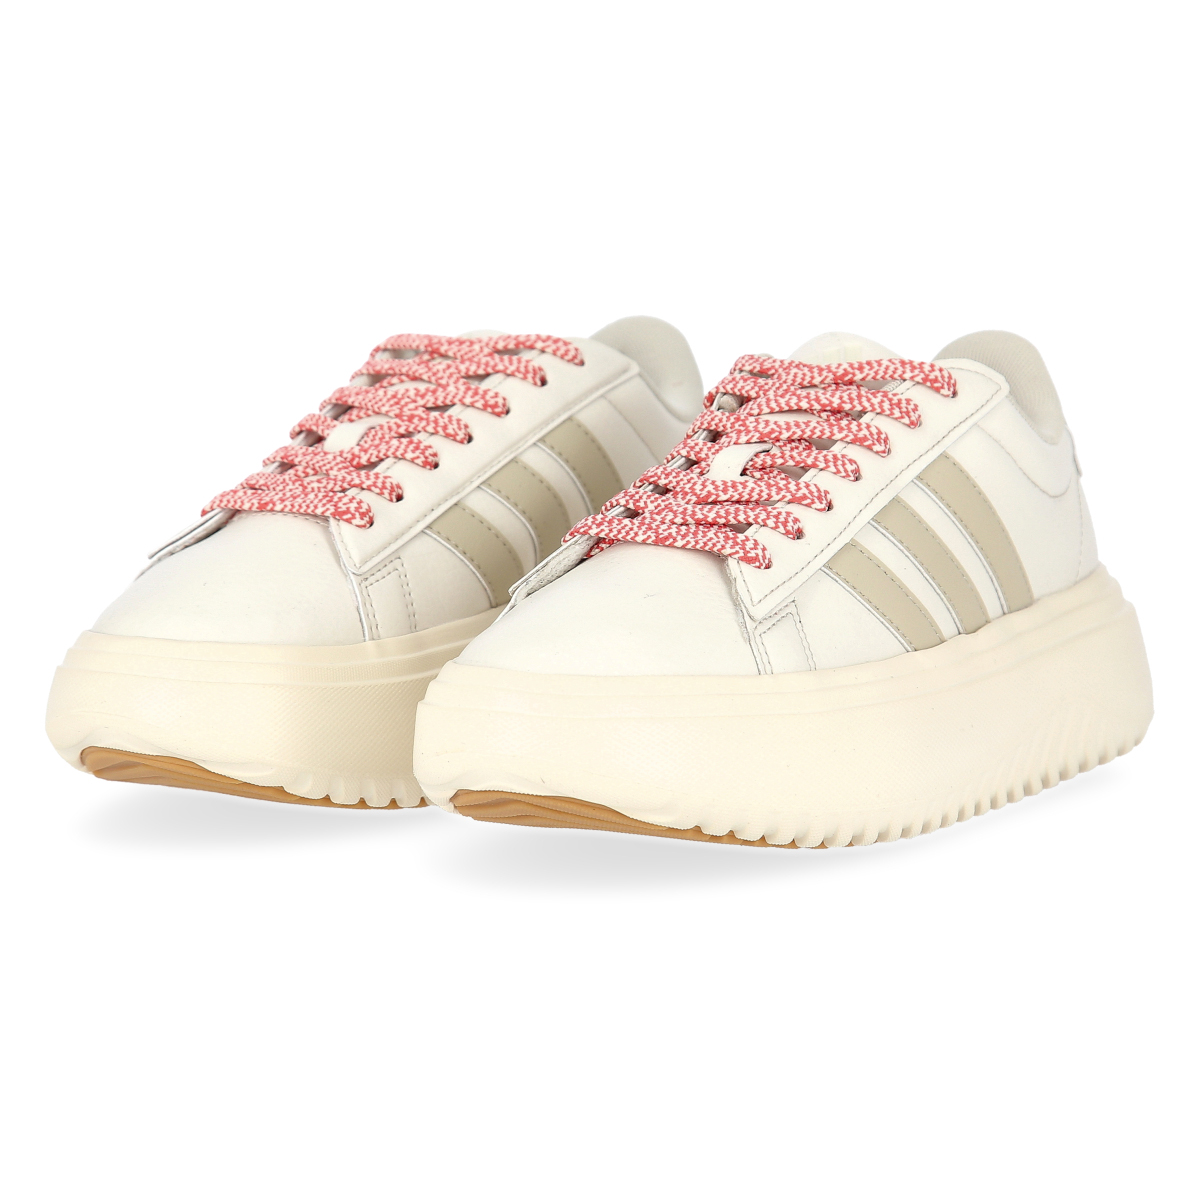 Zapatillas adidas Grand Court Platform Mujer,  image number null